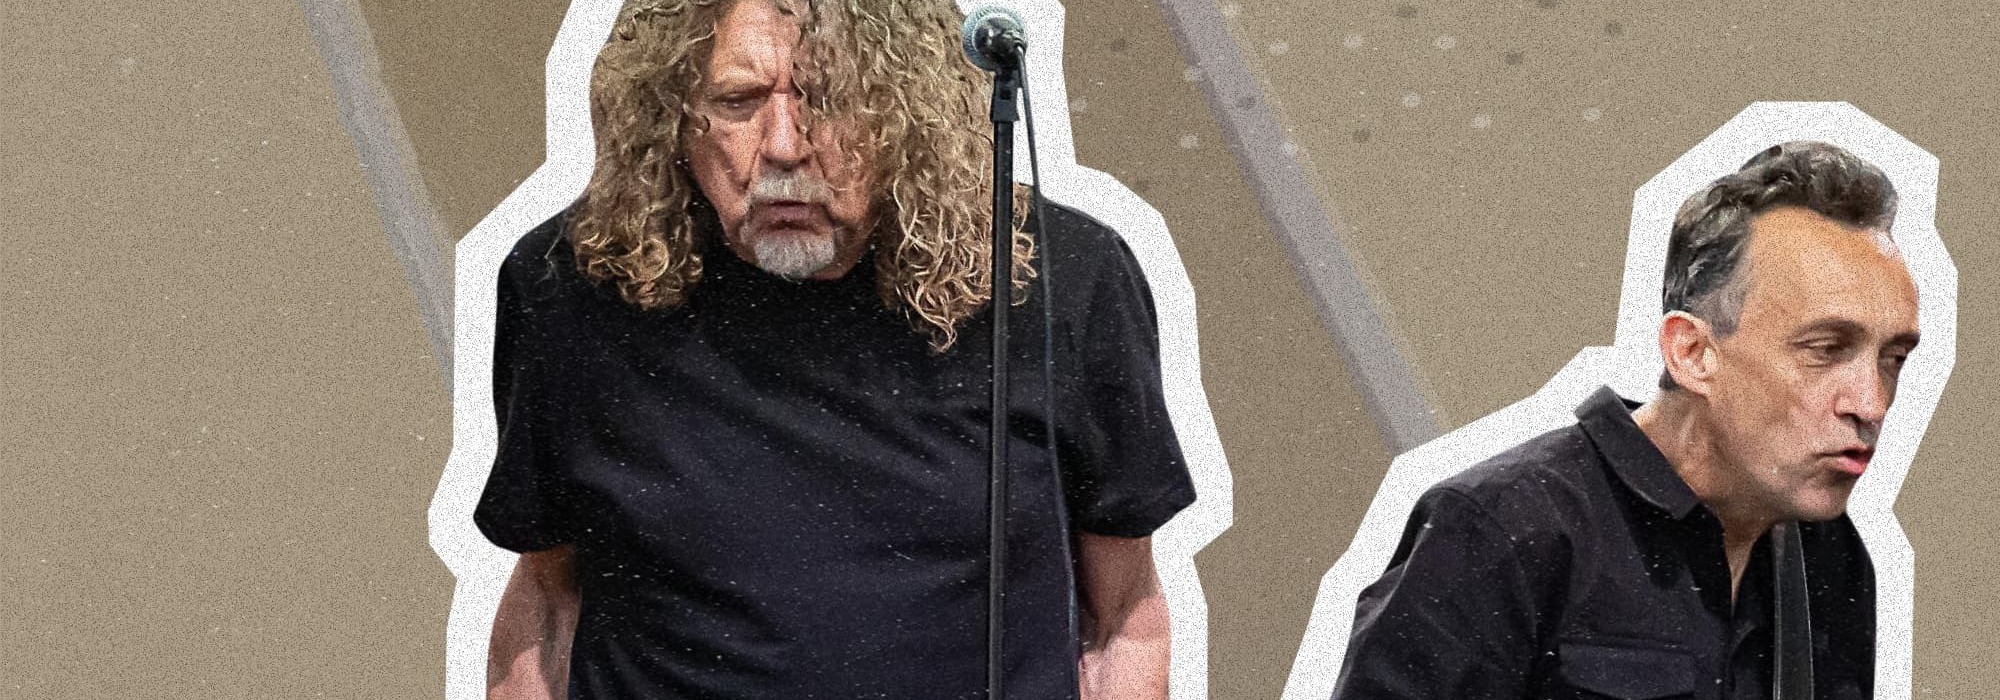 A Robert Plant and Alison Krauss live event